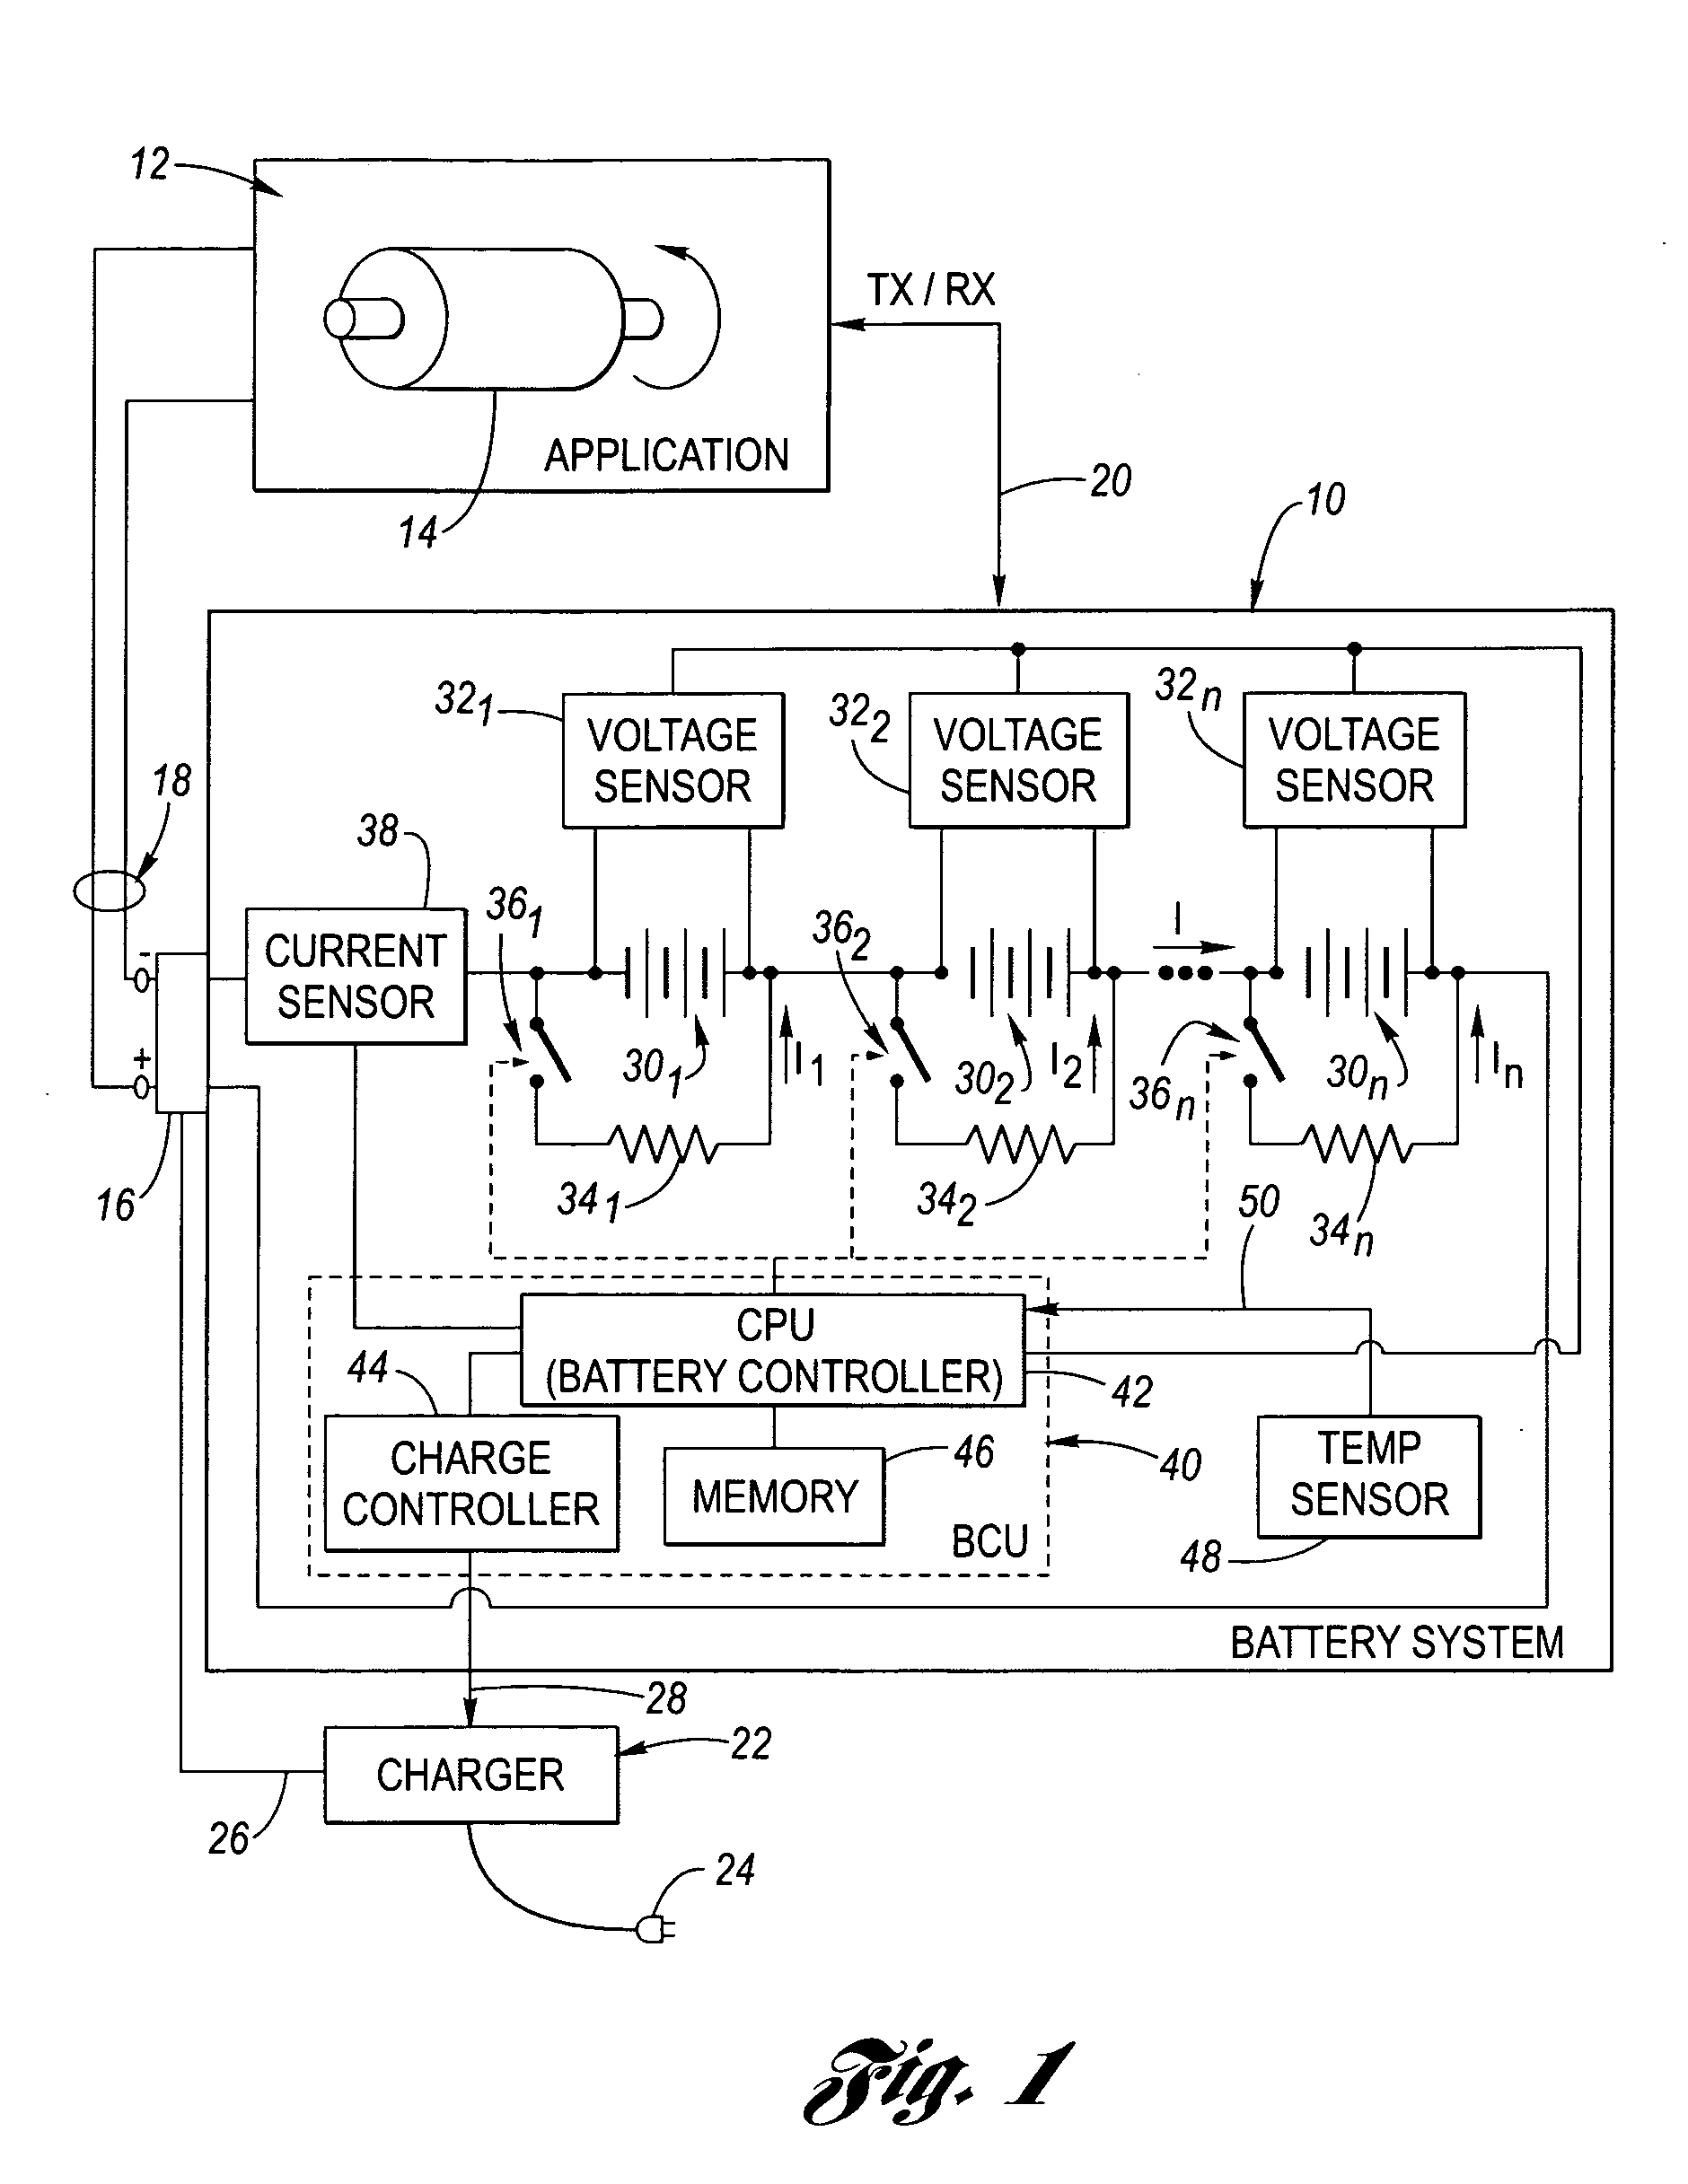 Method for battery cold-temperature warm-up mechanism using cell equilization hardware